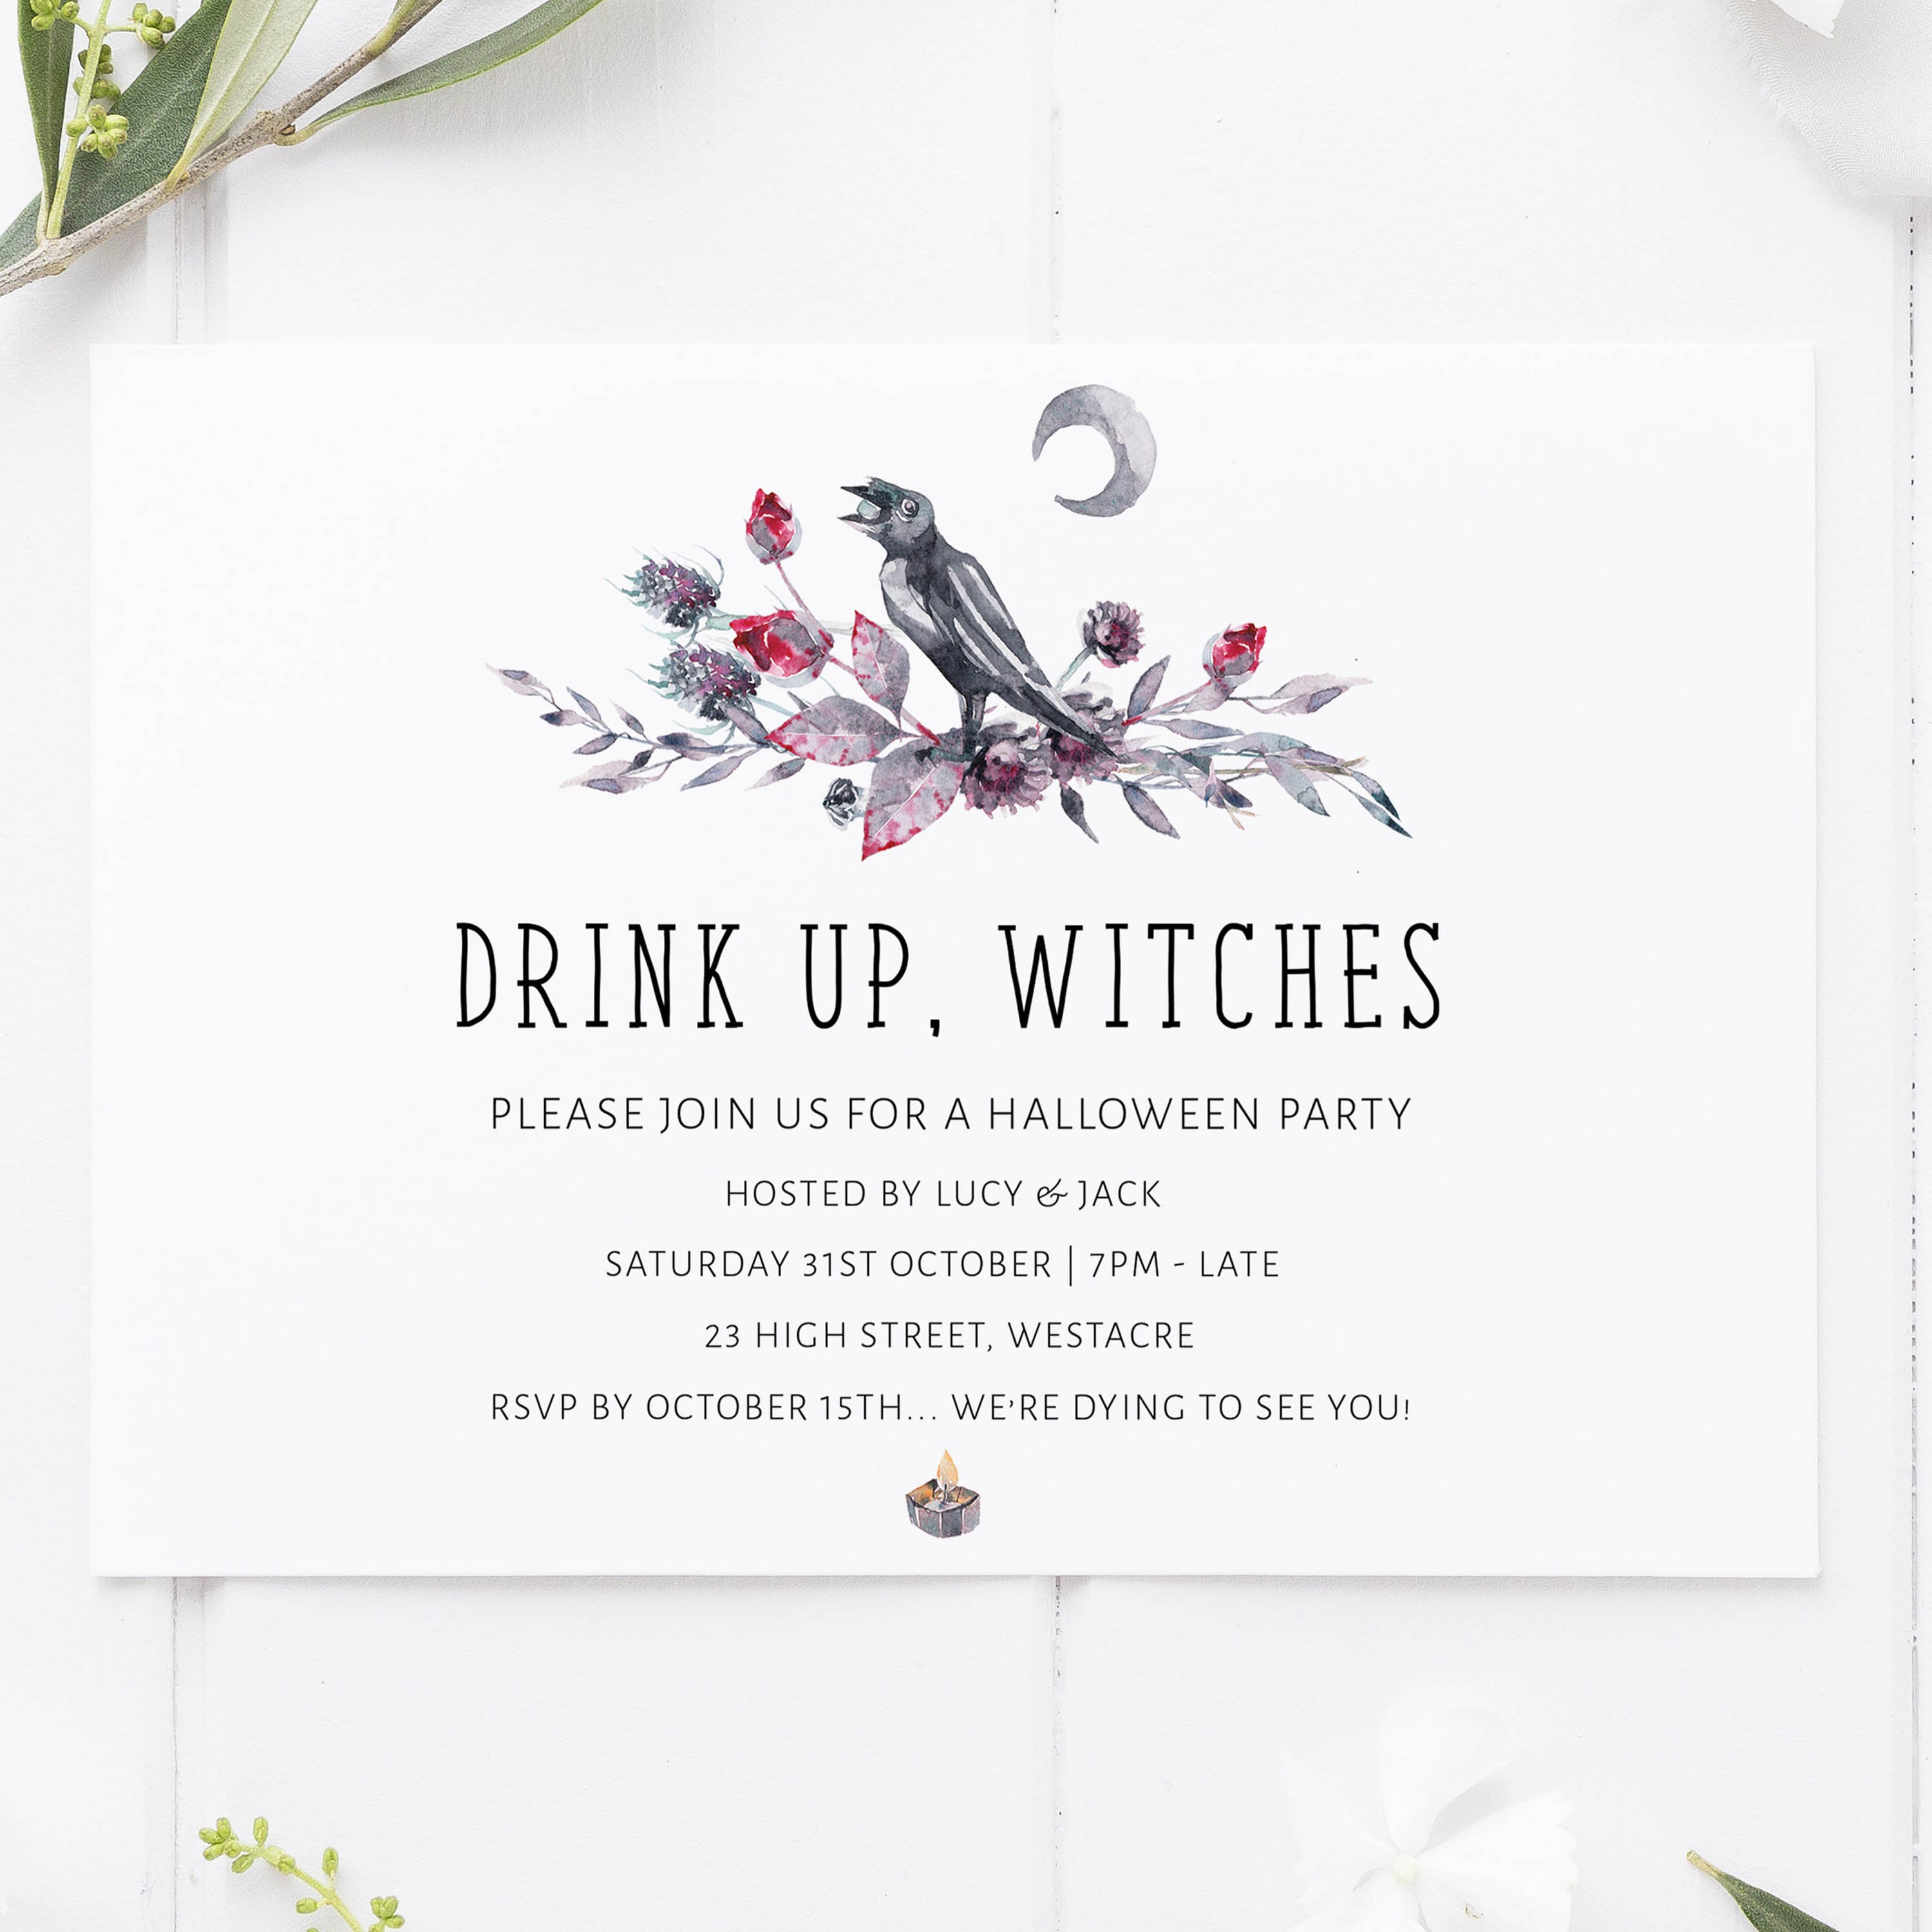 drink up witches invitation, halloween printable invitations, editable halloween invitations, fun halloween invites, halloween invites, halloween ideashalloween invitations, editable halloween invitations, printable halloween invitations, spooky halloween invitations